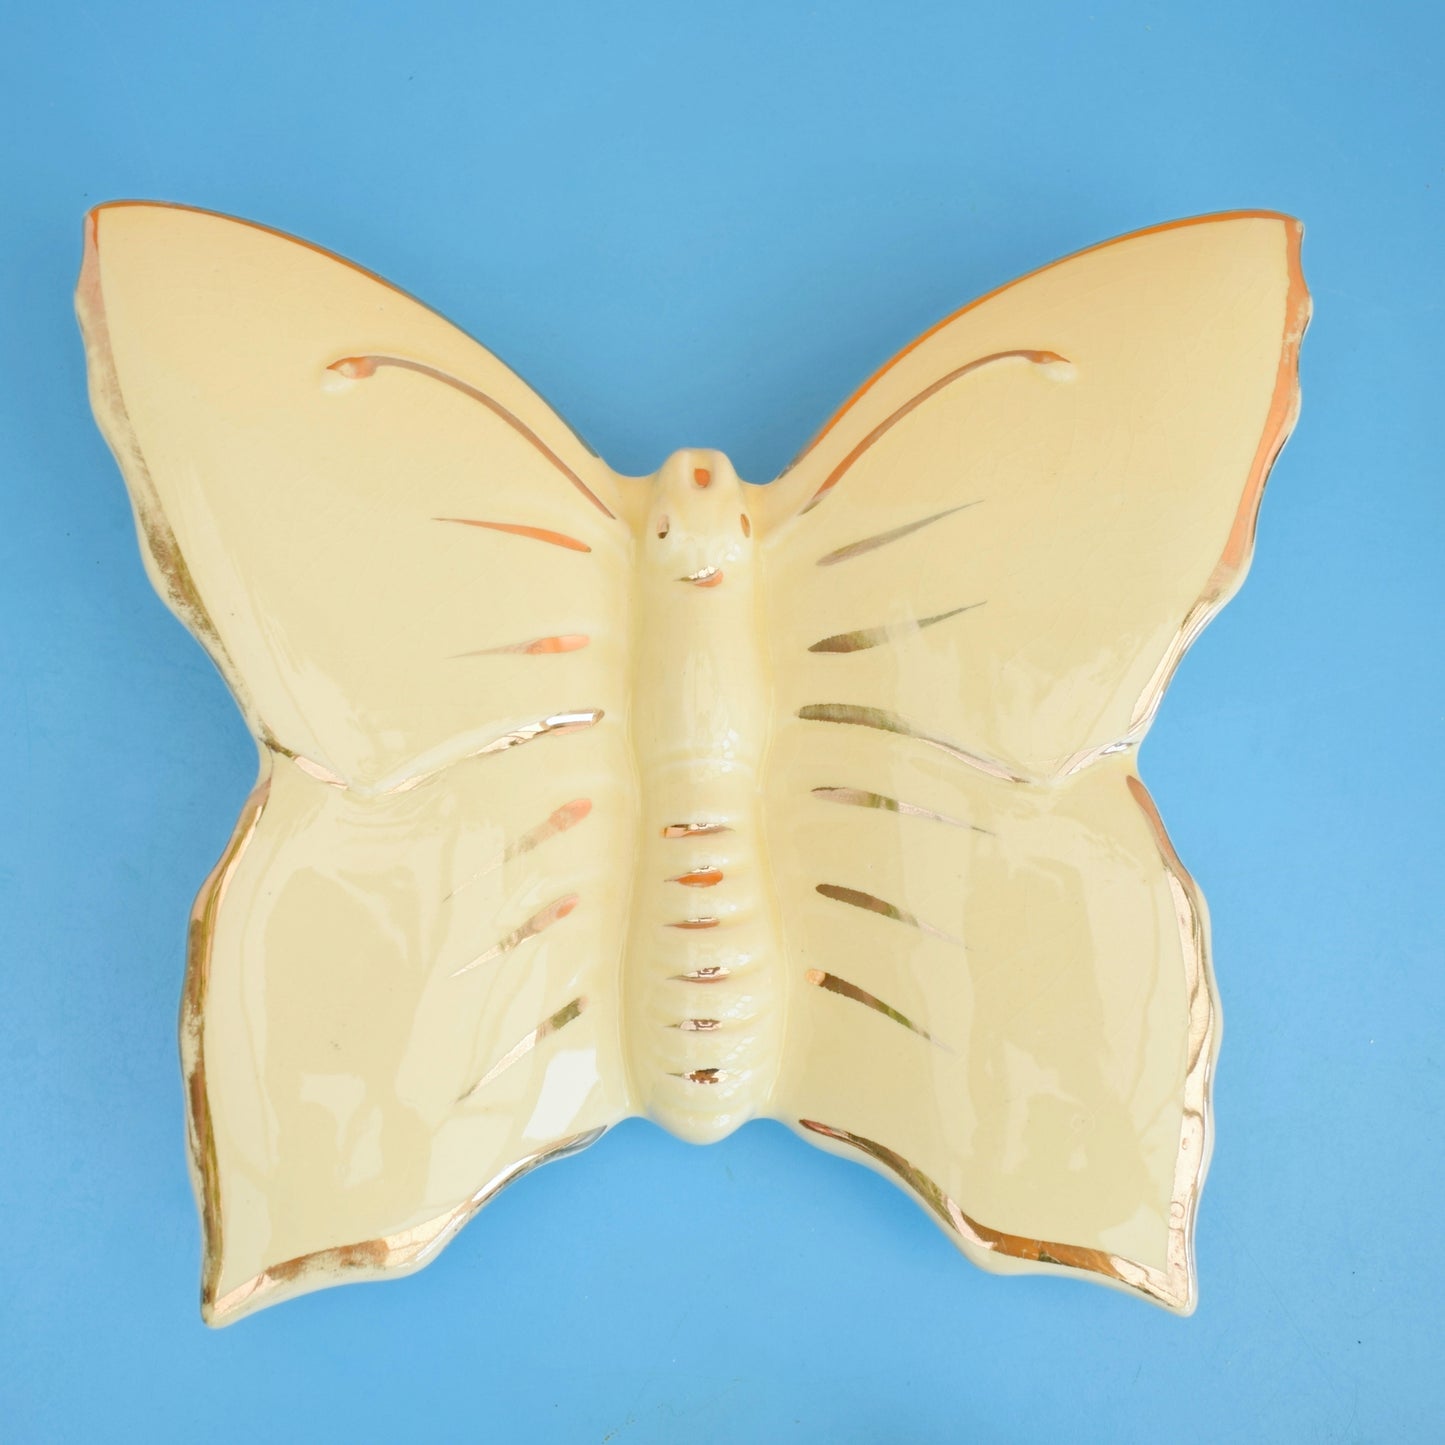 Vintage 1950s Ceramic Wall Pockets - Butterfly